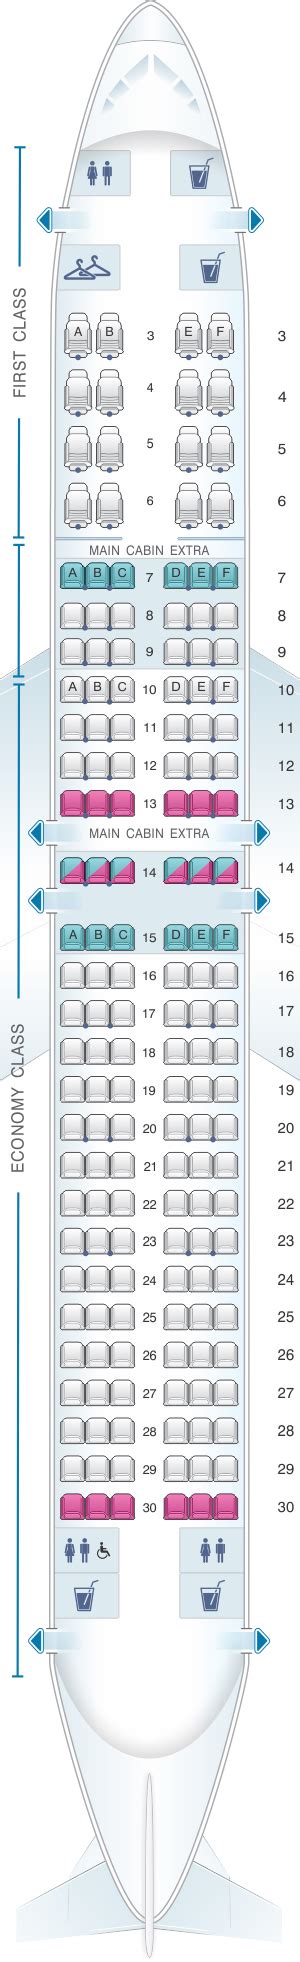 American airlines seat map 737-800. The menu of available products can be found . Products must be purchased with Euros or with a credit card. Transavia flies the Boeing 737-800 with 189 seats in a one-class configuration of Economy. Submitted by SeatGuru User. Transavia - PH-HZV was chartered for a flight from Dublin to Lourdes - Sept 4th 2019. 